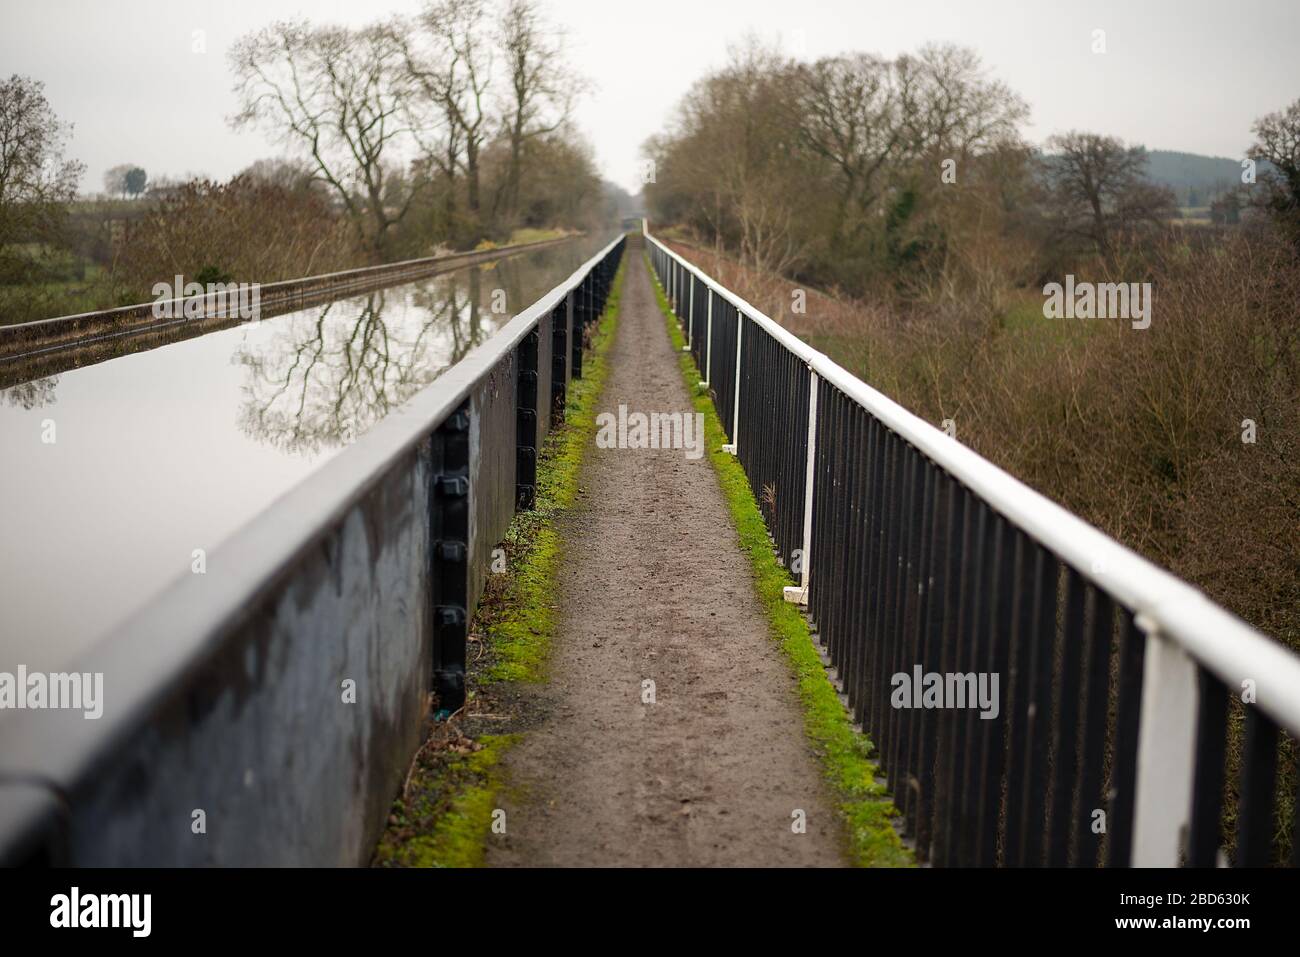 The tow path / footpath along side the Edstone aqueduct, the longest aqueduct in England on the Stratford upon Avon canal. Stock Photo